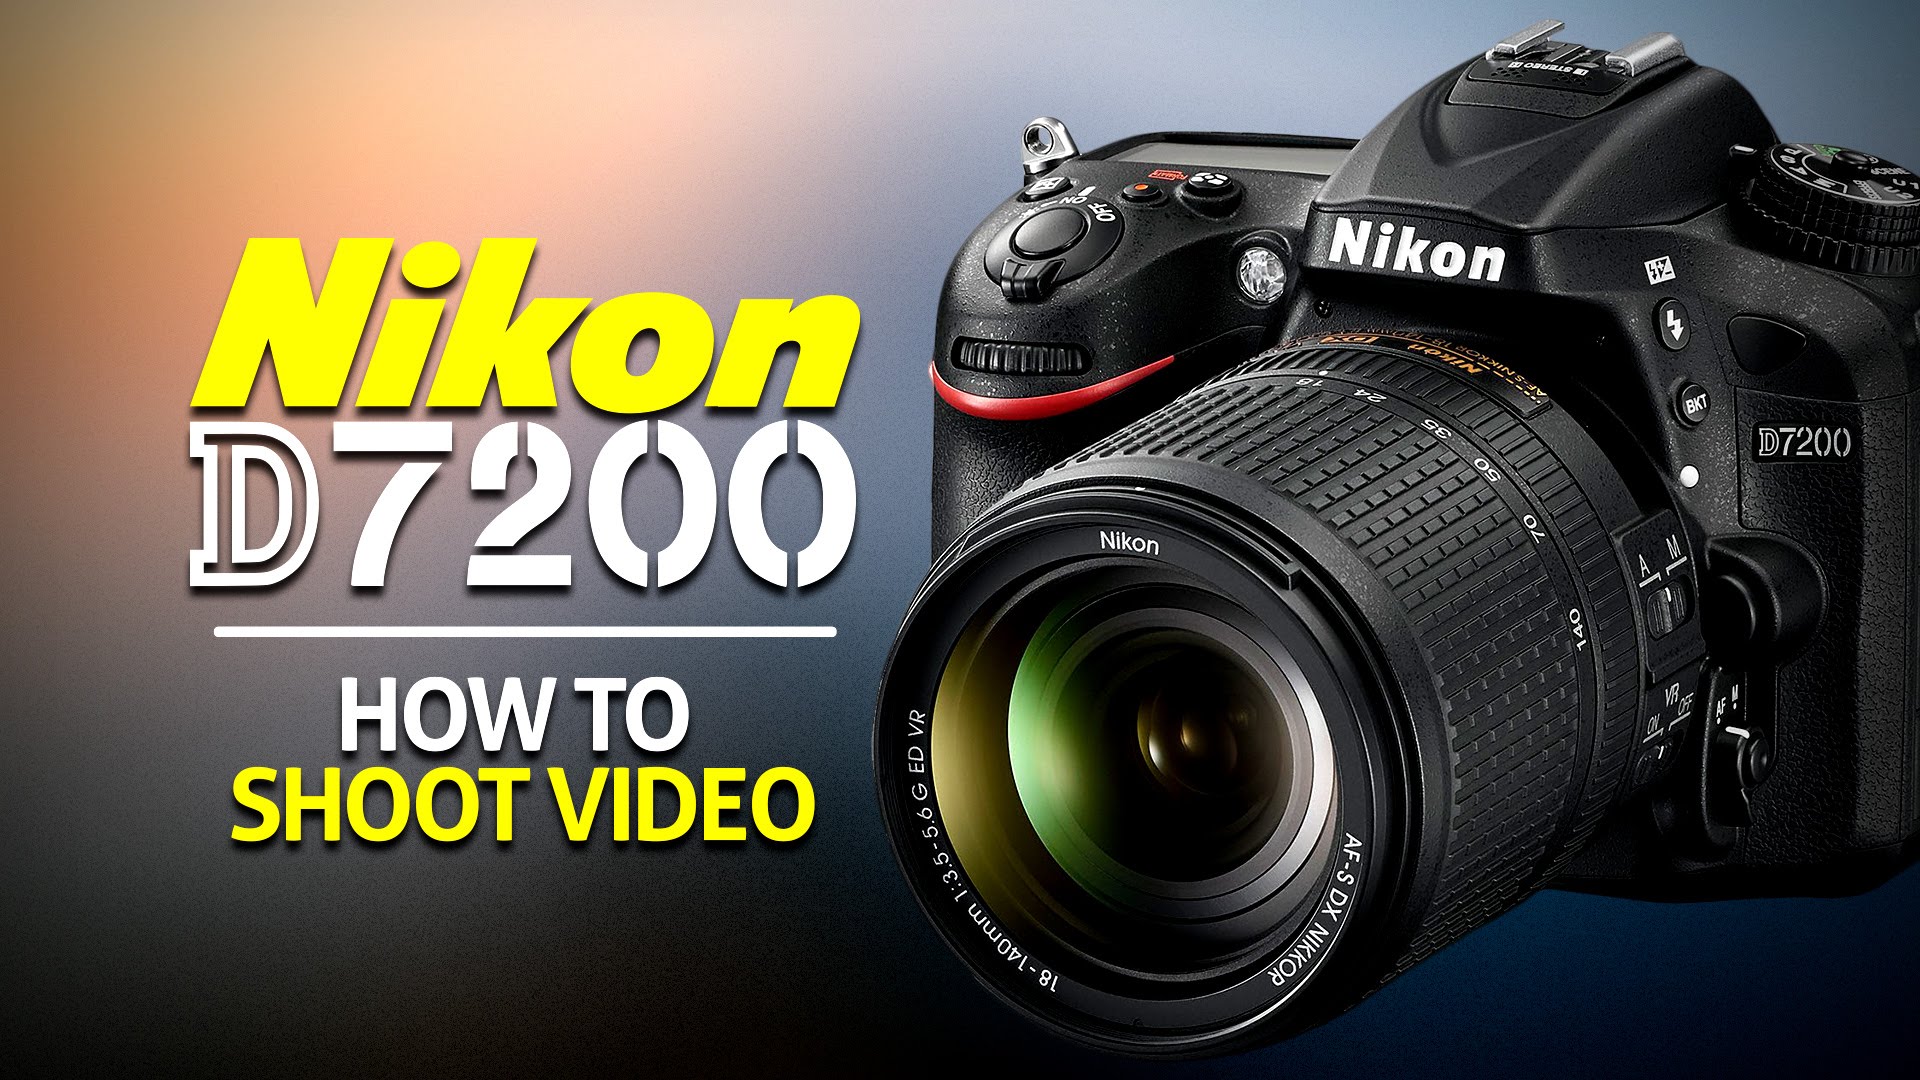 How to Shoot Video on Your Nikon d7200